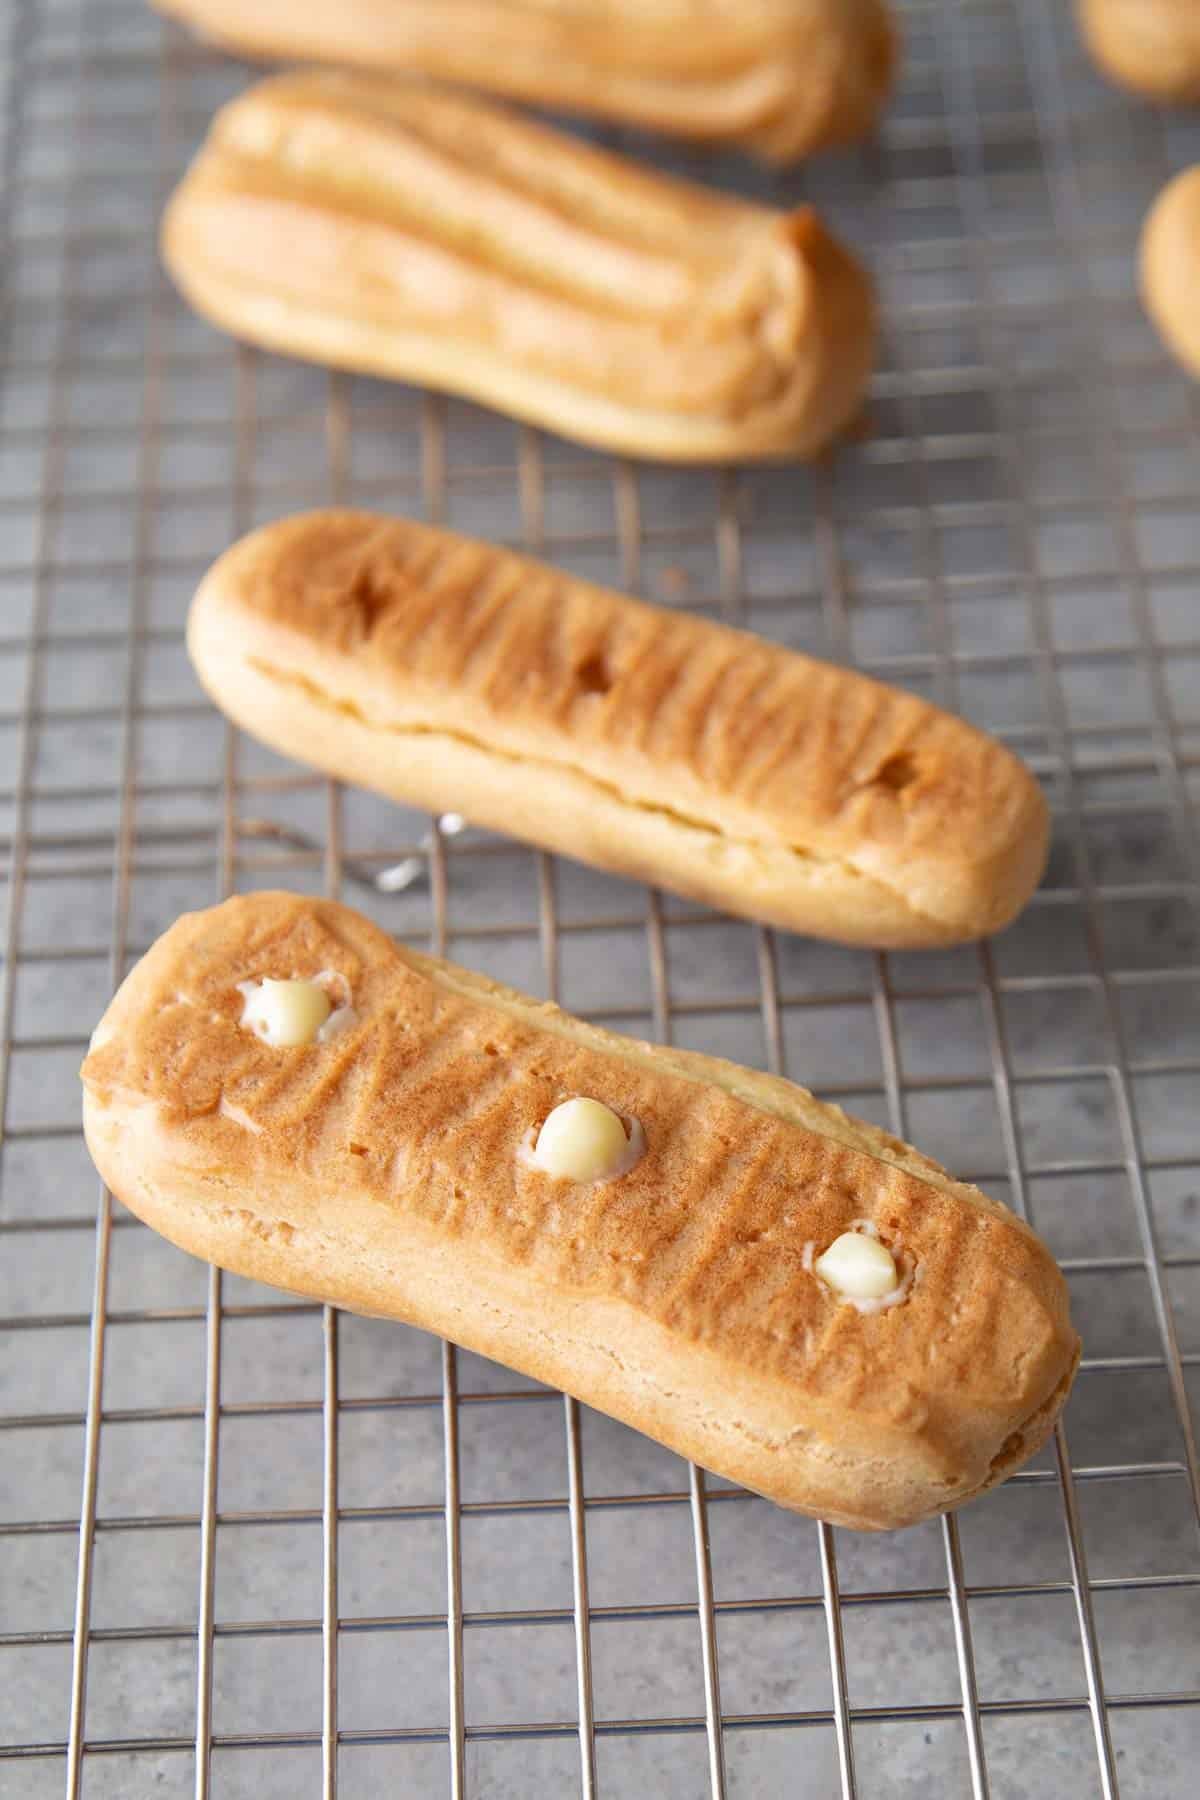 poke three holes on the bottom of eclair and fill with pastry cream.